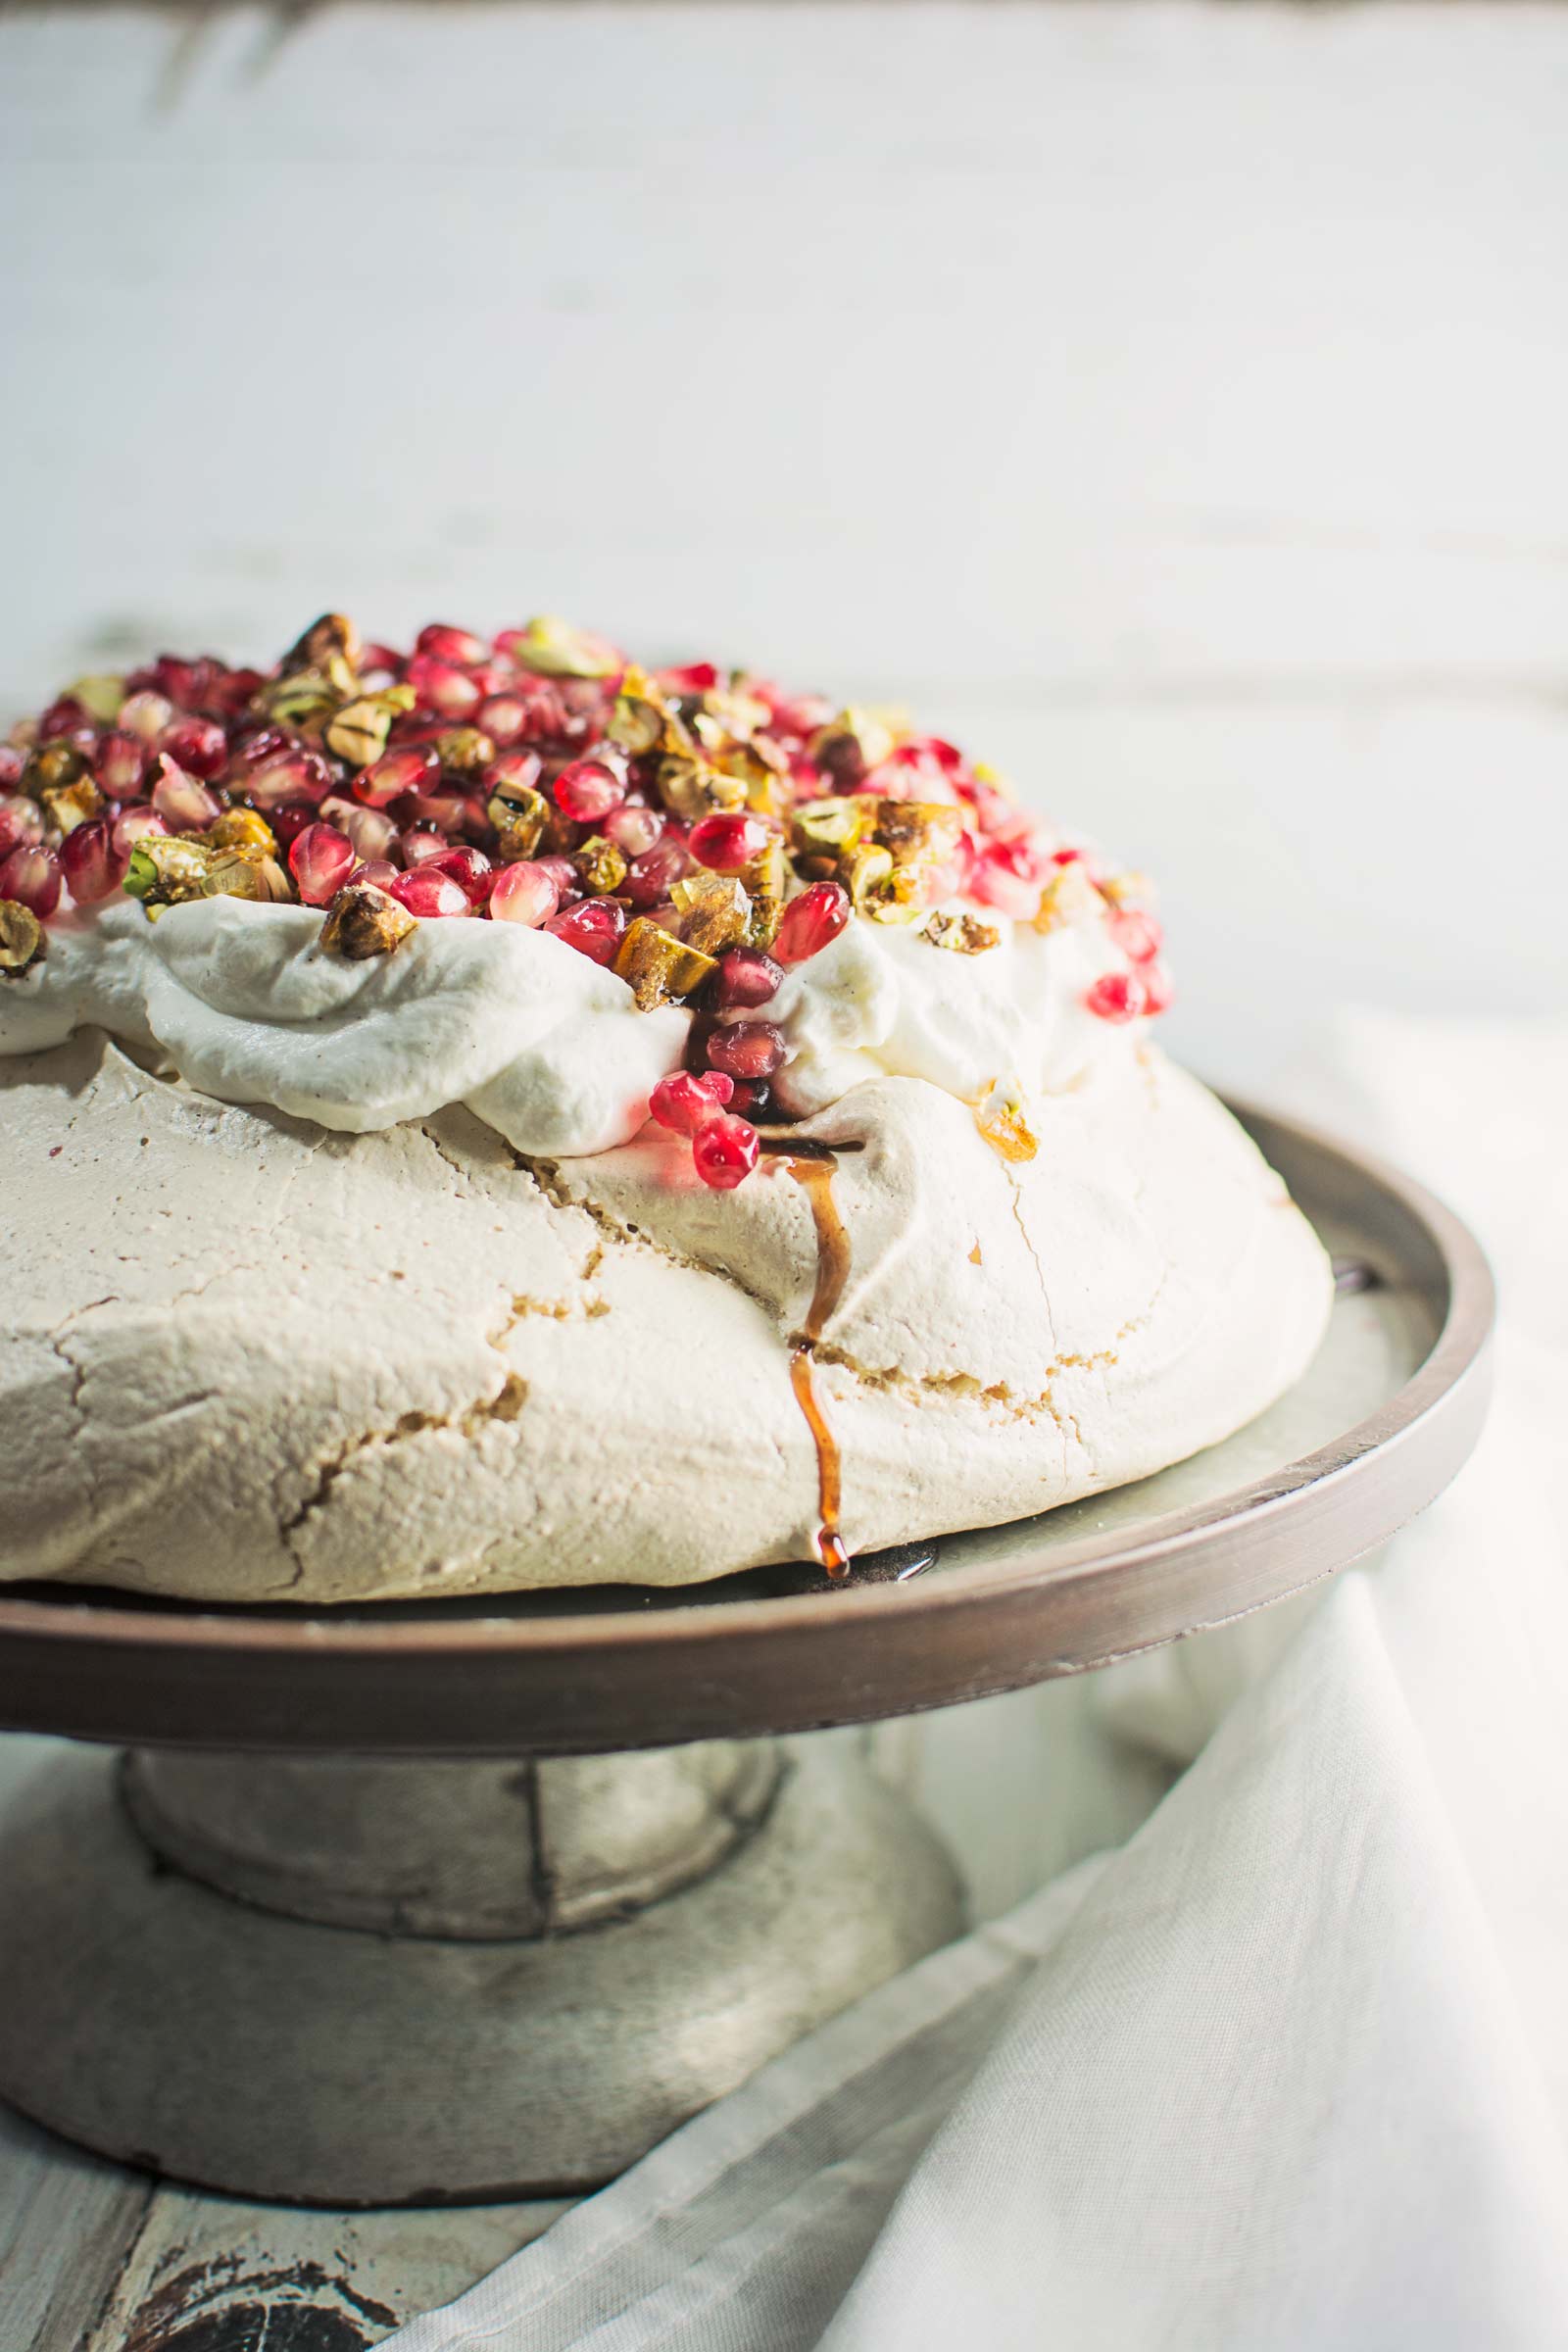 A gorgeous Winter Pavlova, with scattered pomegranate seeds, and topped off with pistachio brittle and plenty of cardamom scented cream! Recipe @LittleFiggyFood